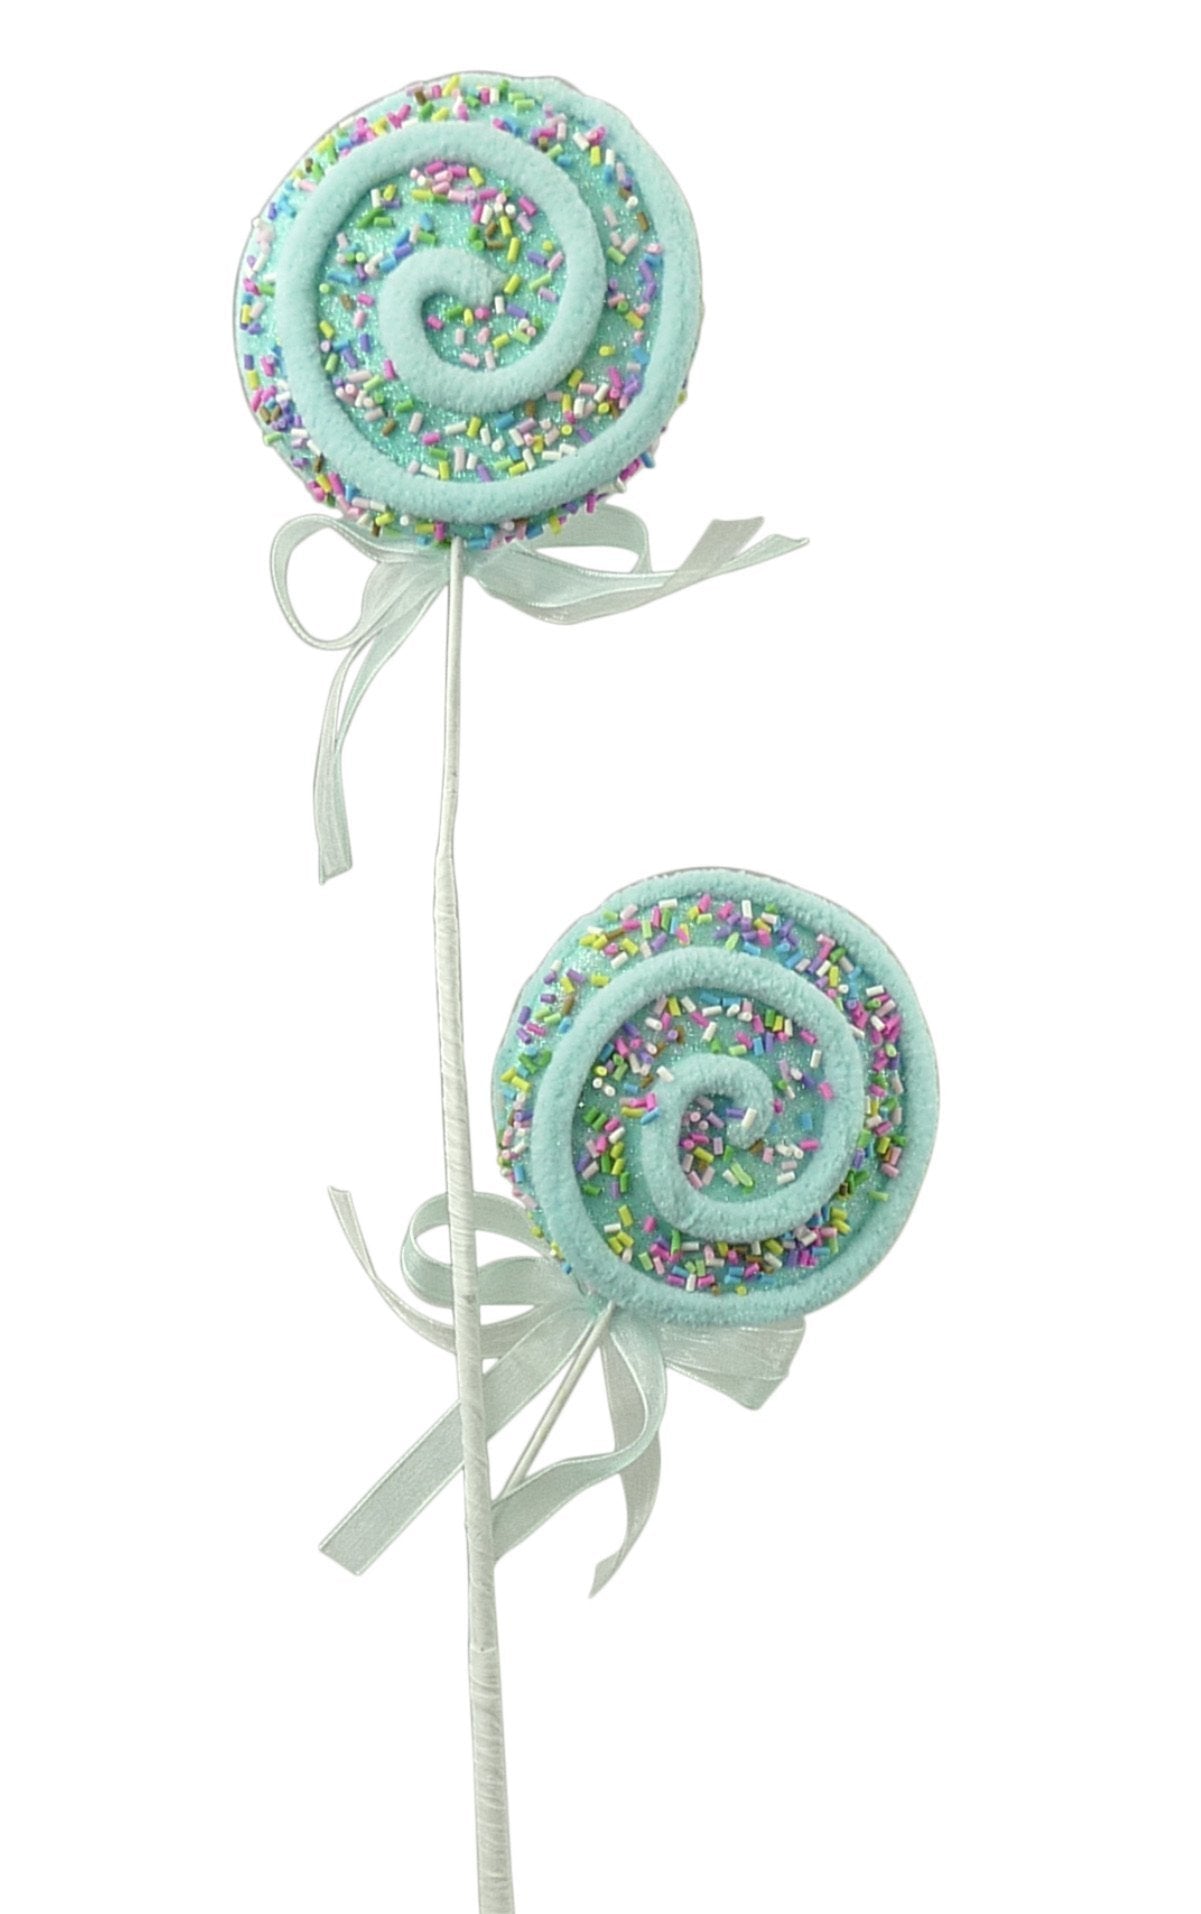 blue chenille trim lollipops spray with sprinkles - Greenery Market Ornaments